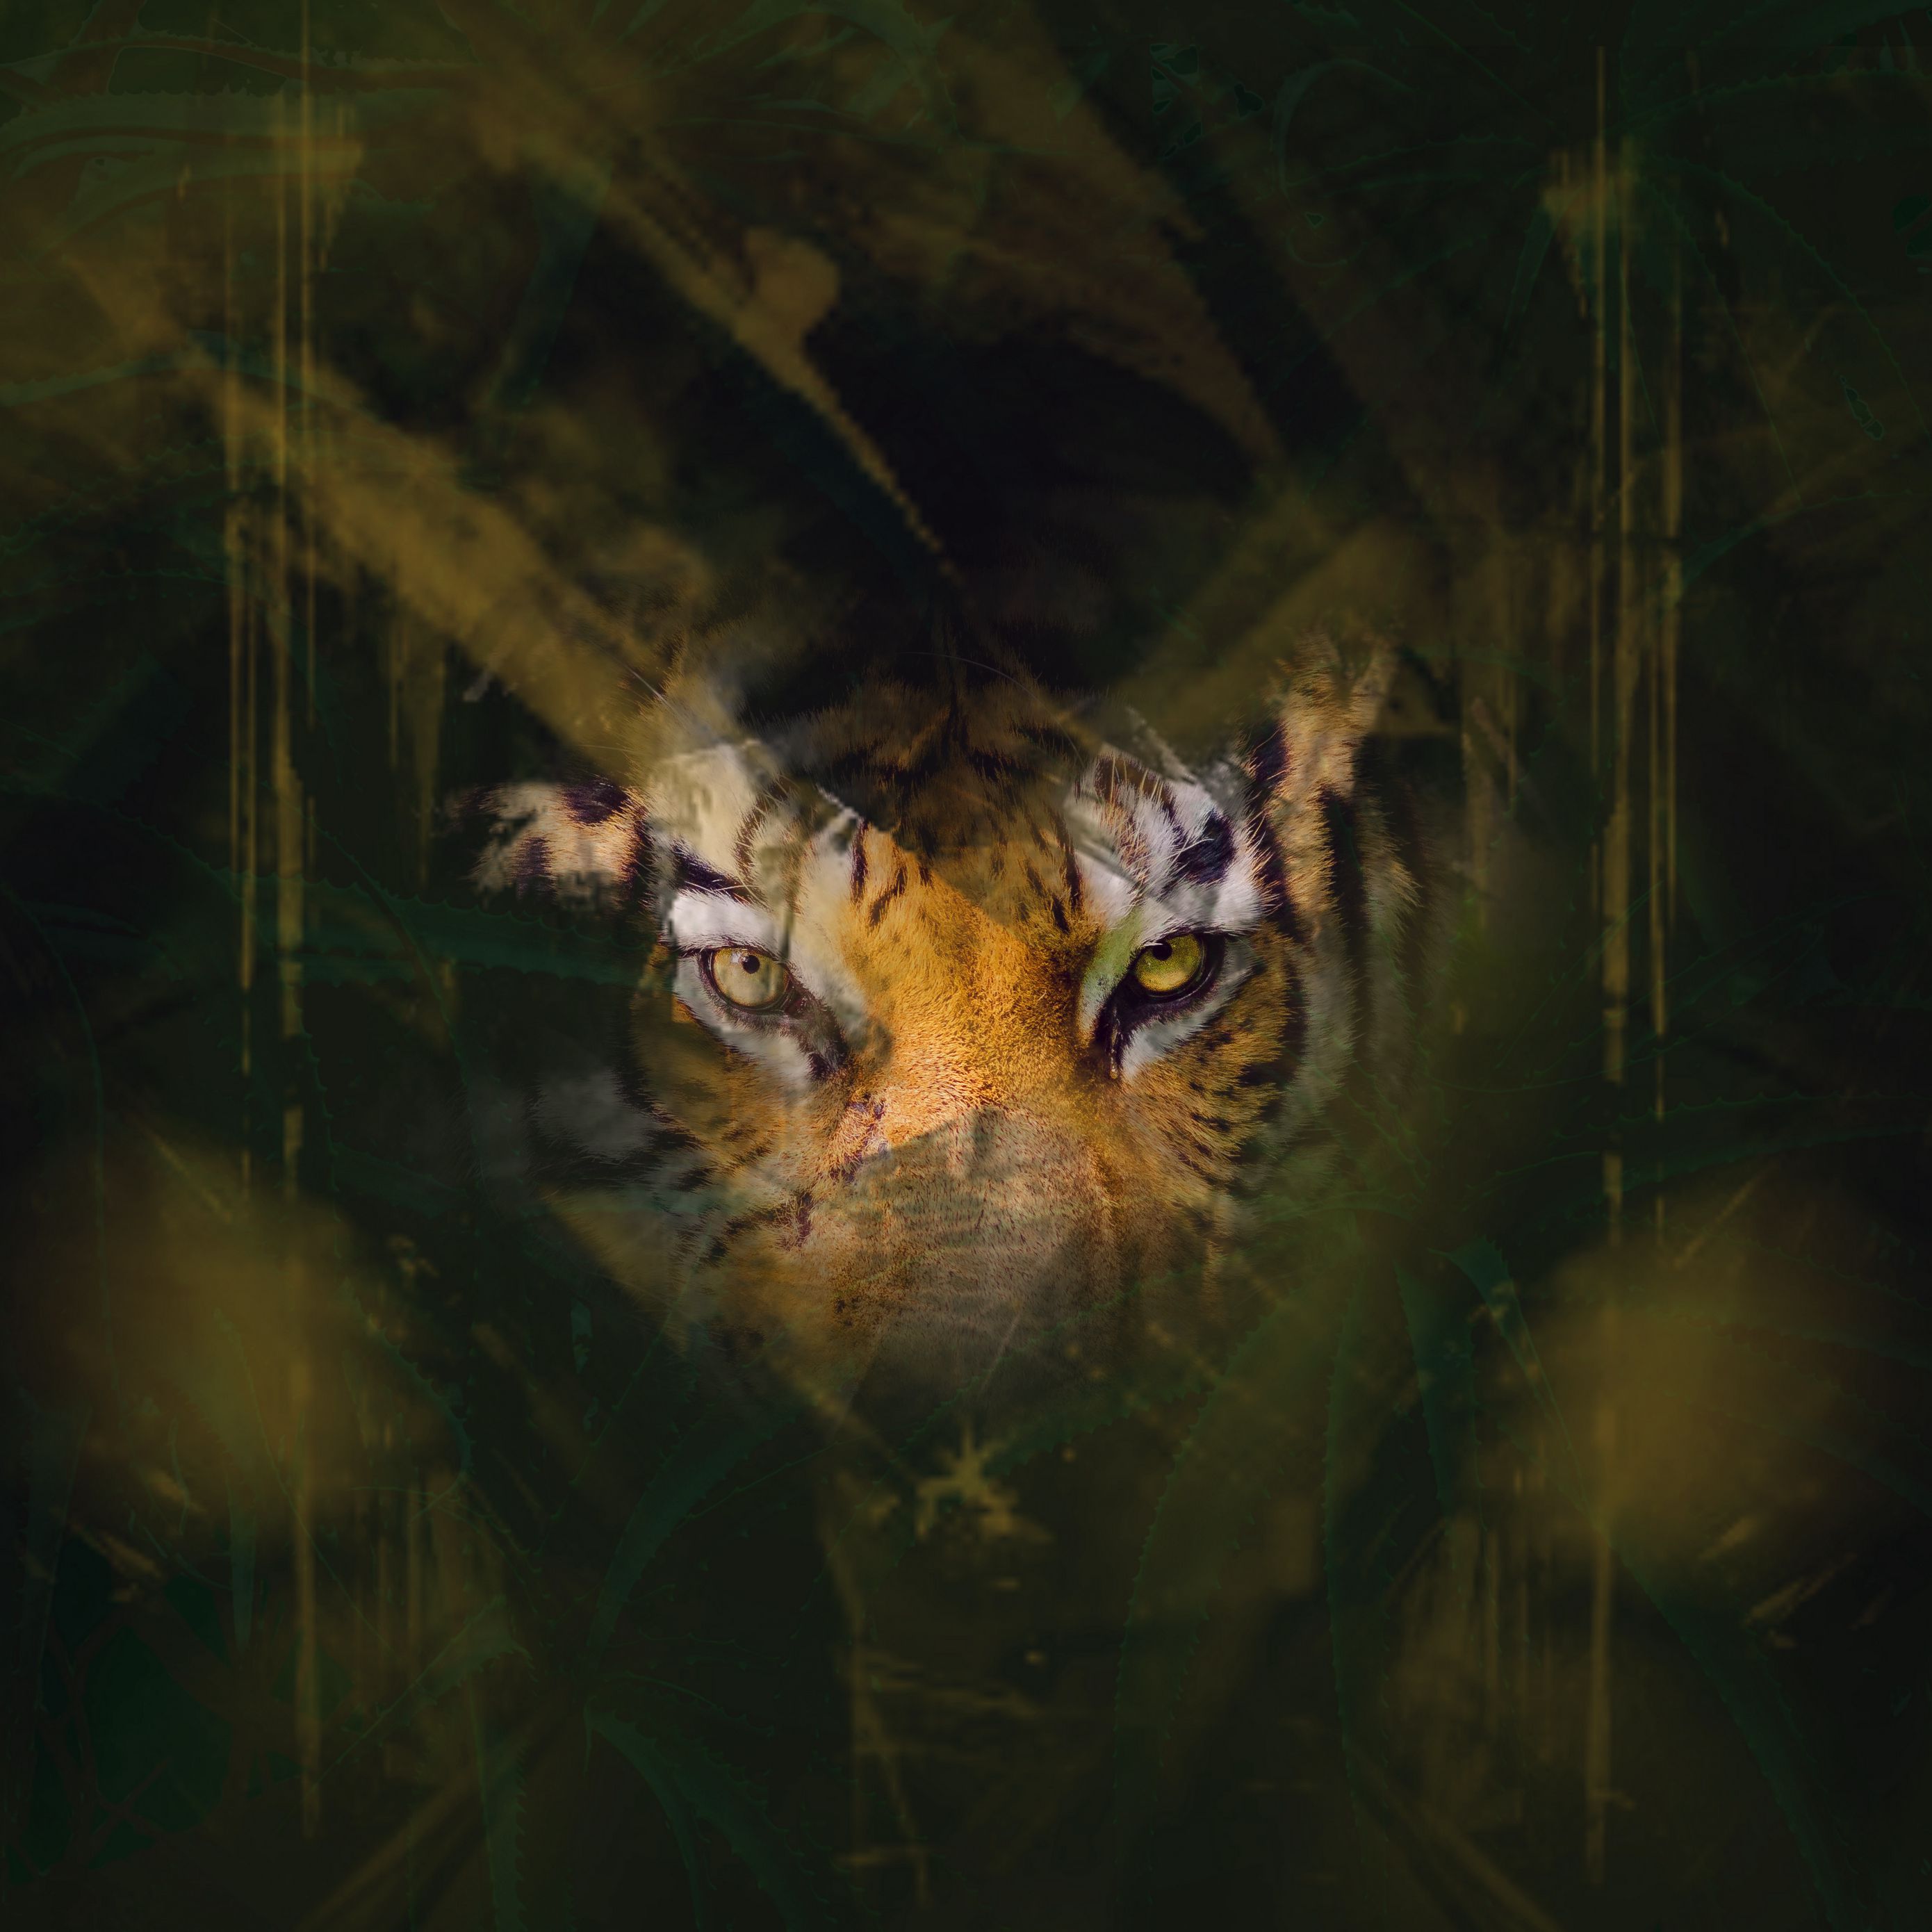 Eye oft tiger Wallpapers Download | MobCup